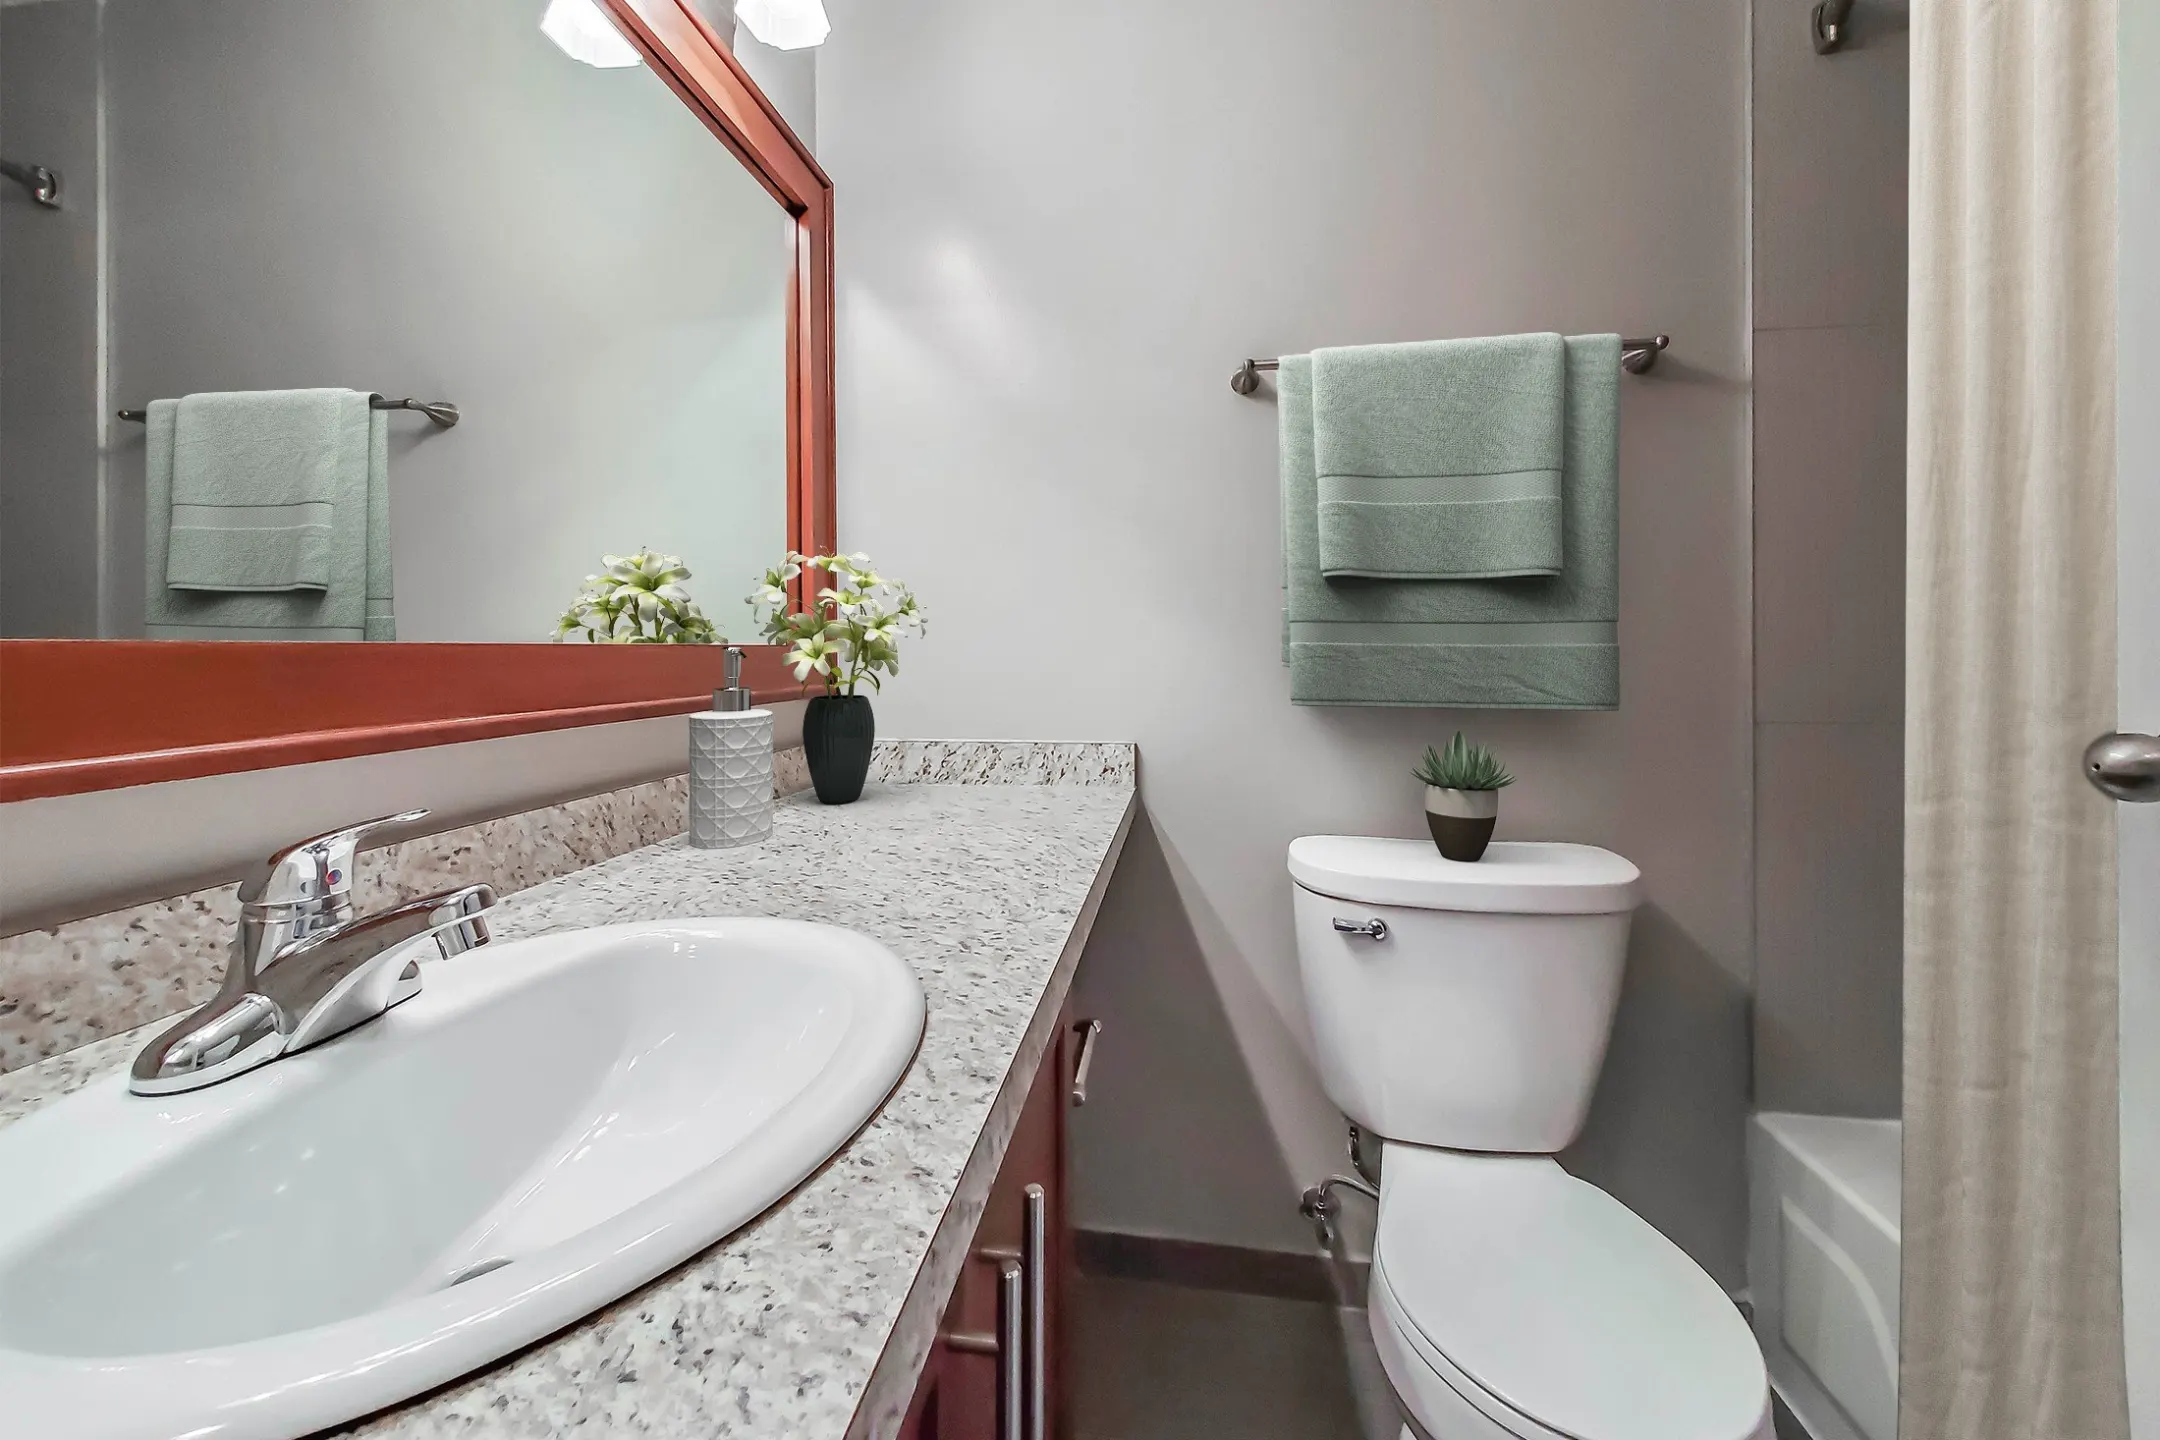 Bathroom - Axis Apartments and Lofts - Chicago, IL